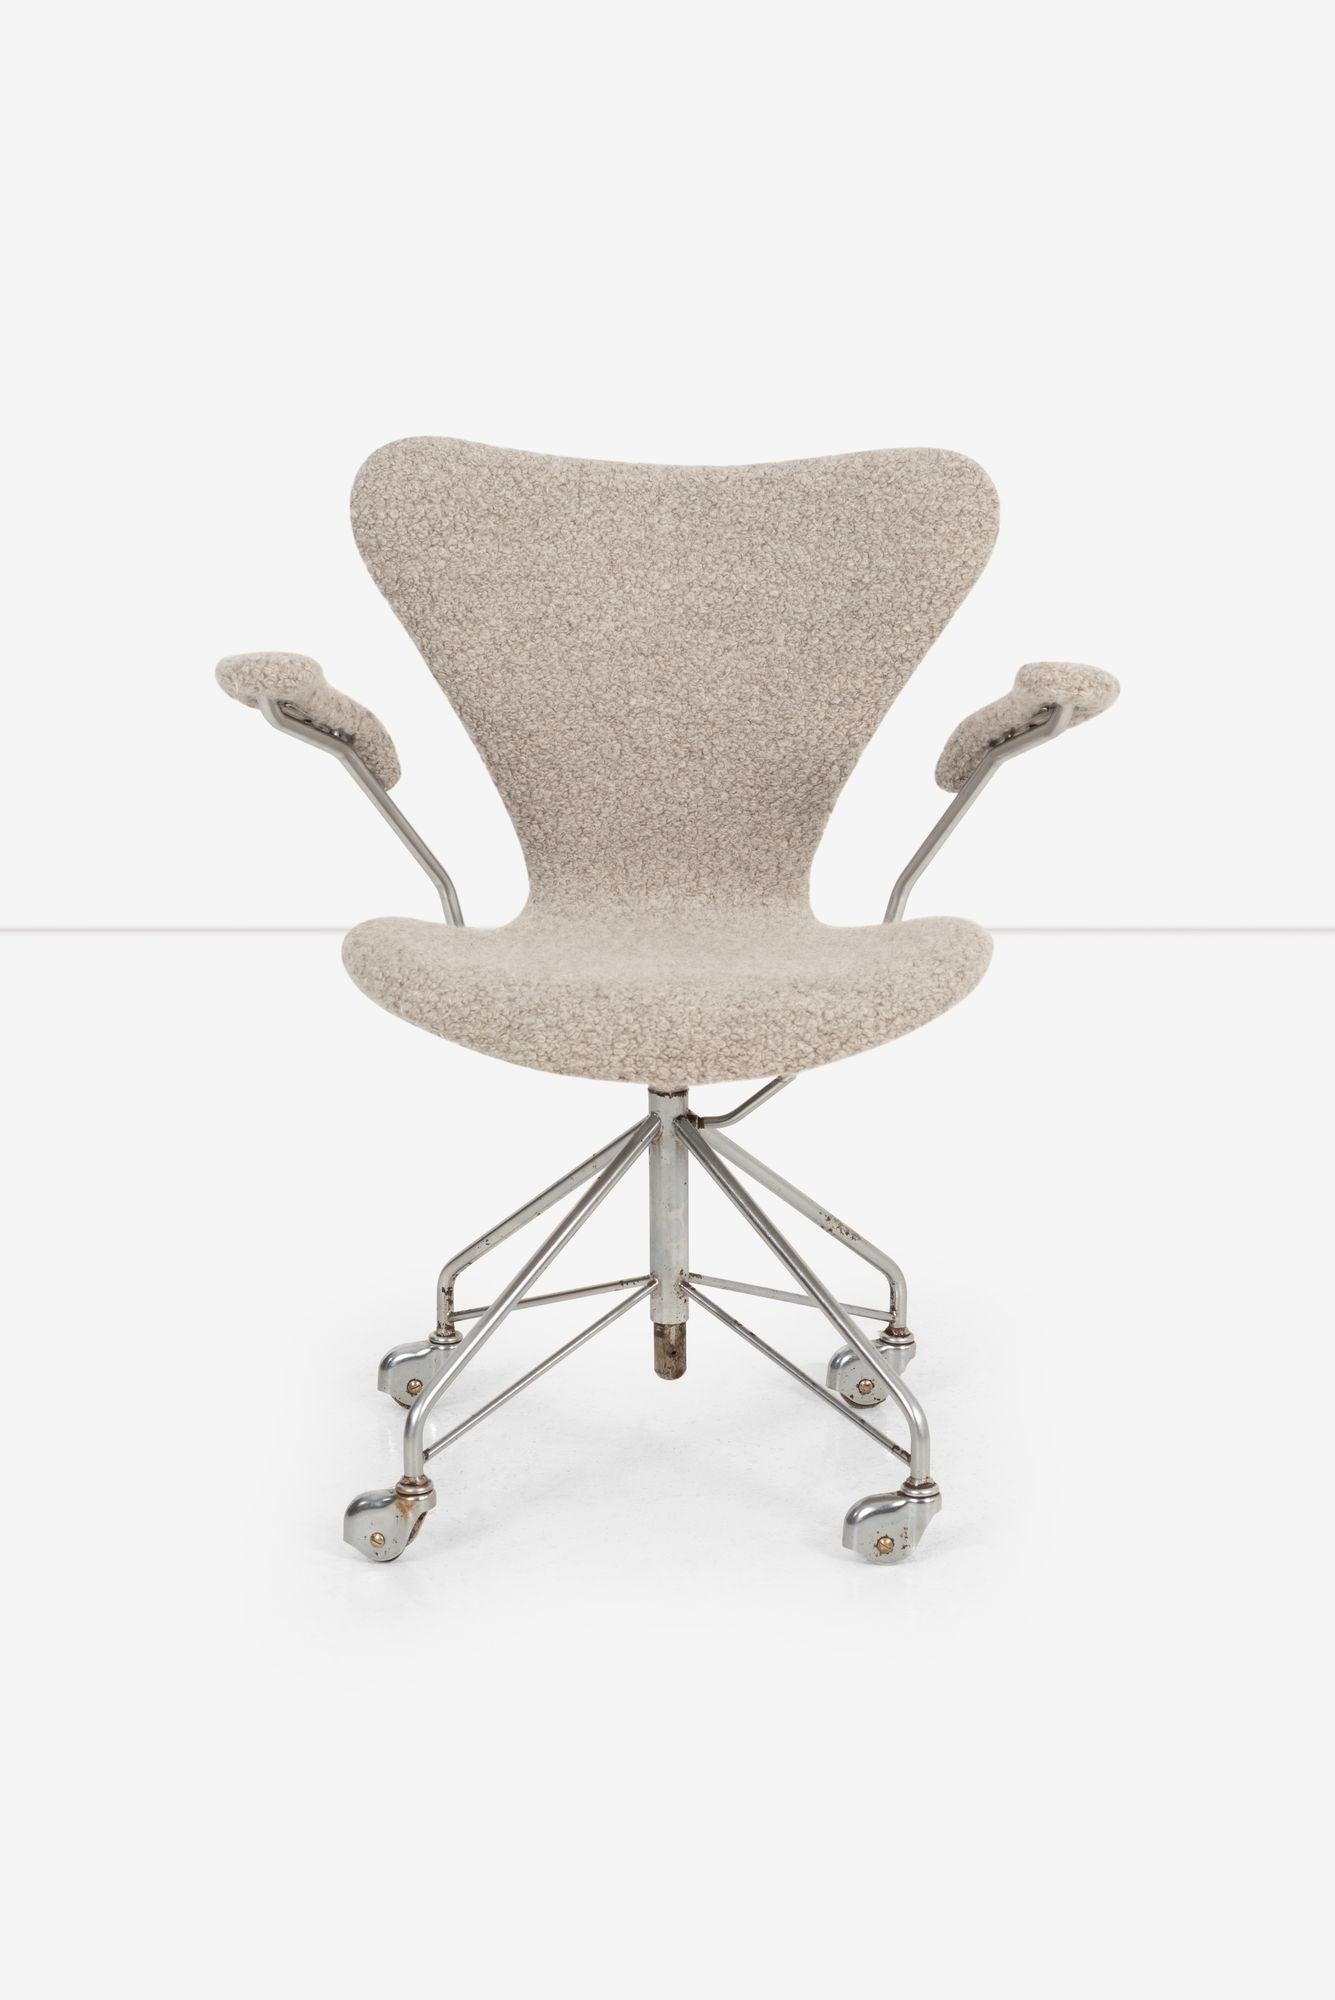 Arne Jacobsen Sevener Desk Chair, model 3117
Swivel and adjustable seat height
Reupholstered with Great Plains 